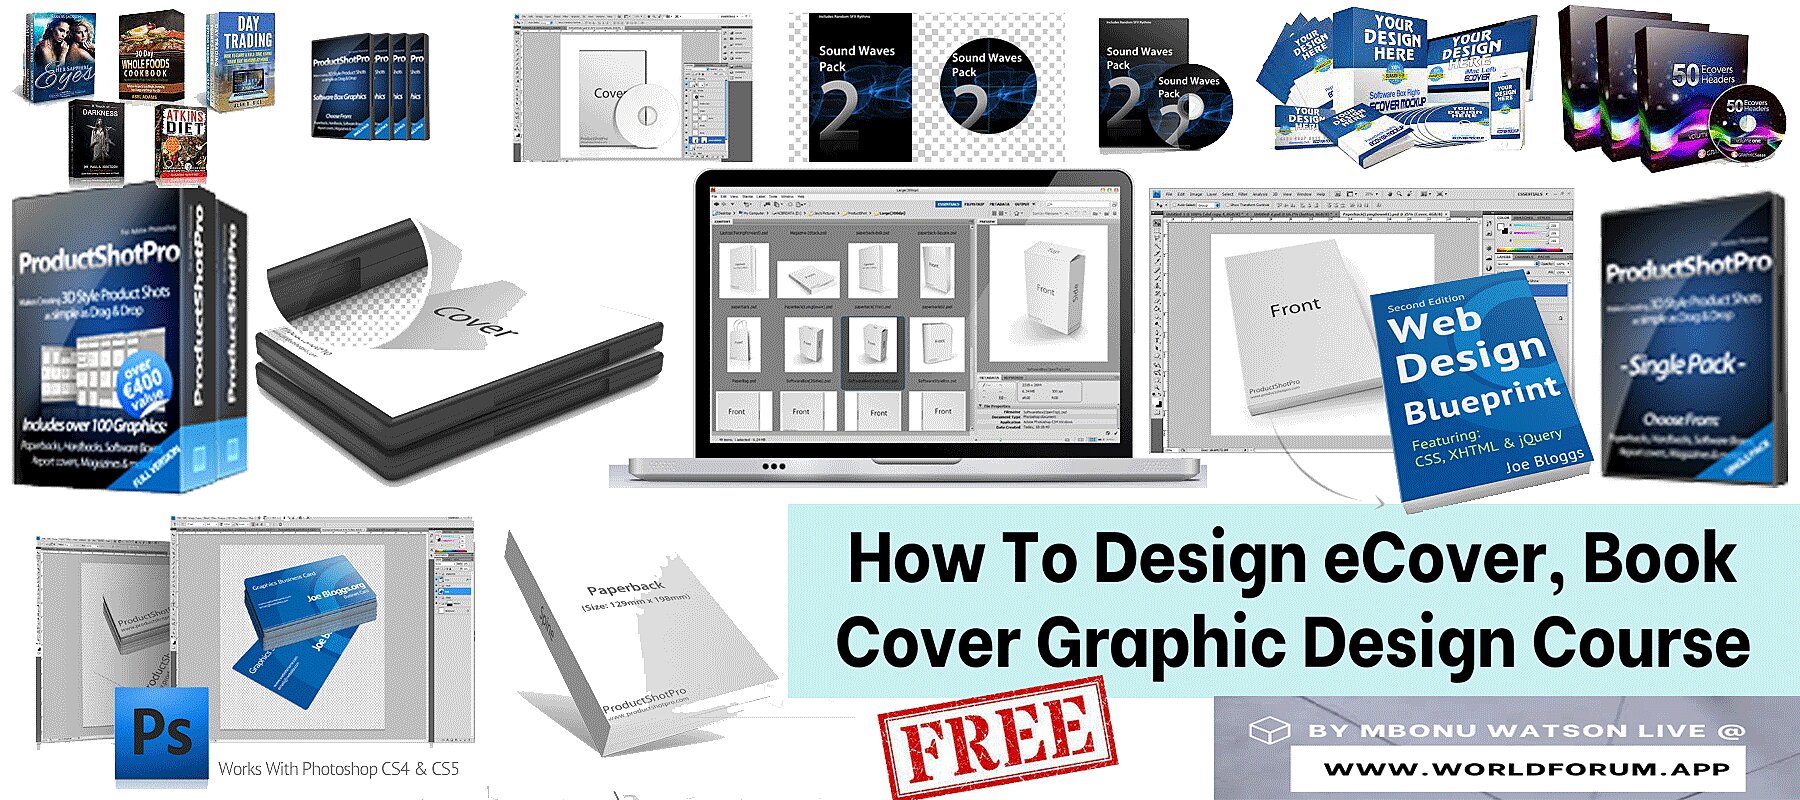 How-To-Design-eCover,-Book-Cover-Graphic-Design-Course.jpg